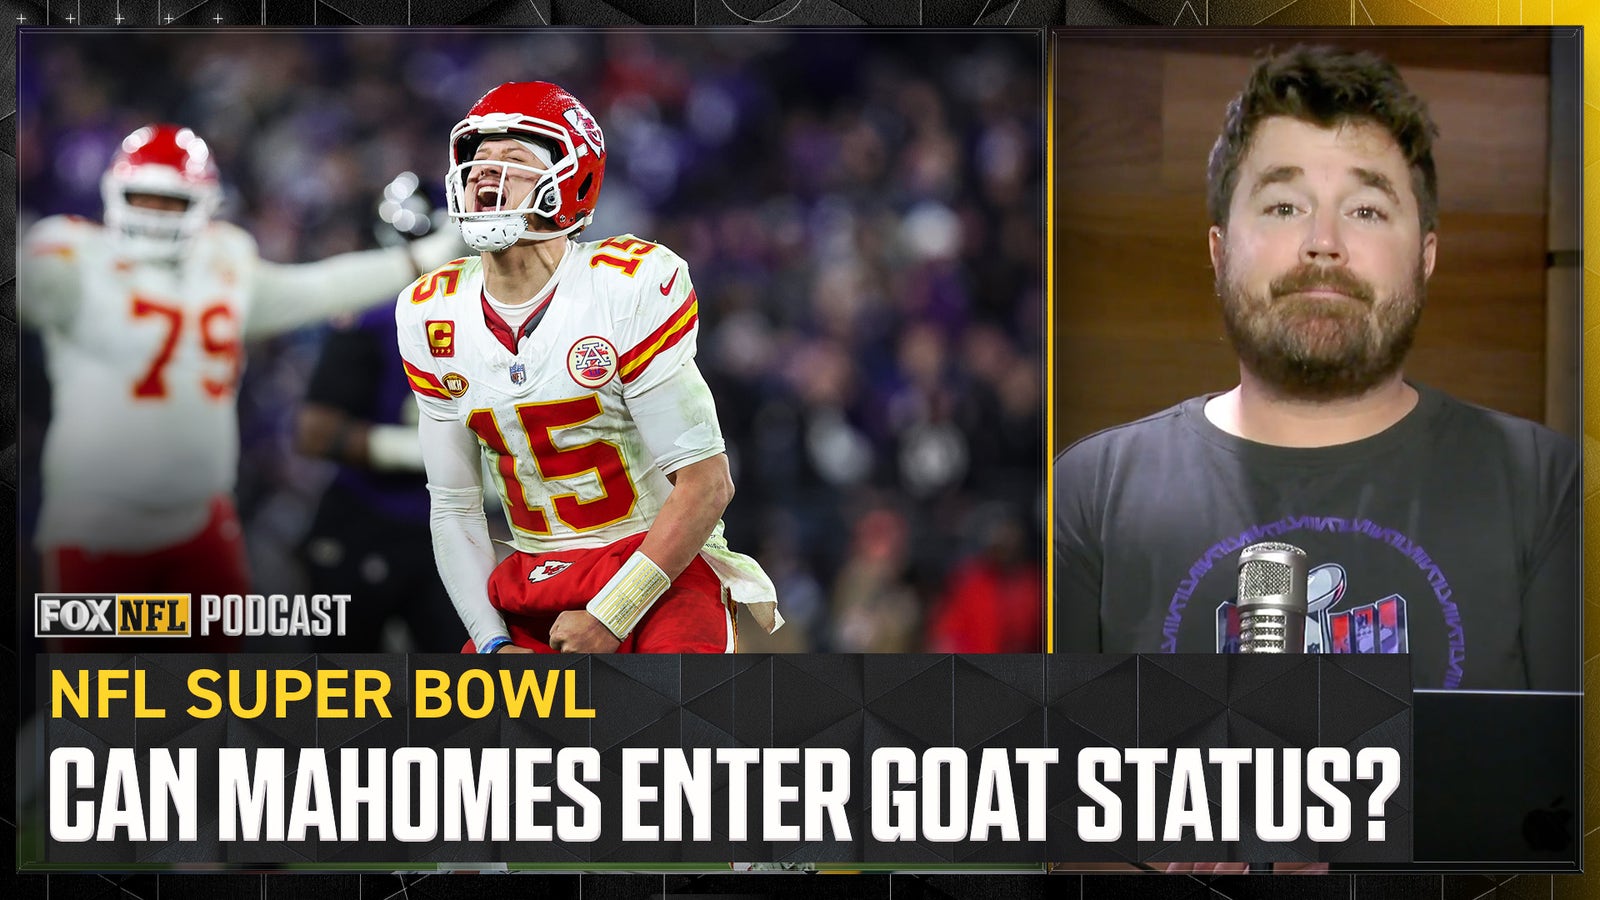 Does Patrick Mahomes enter GOAT status if the Chiefs win the Super Bowl?